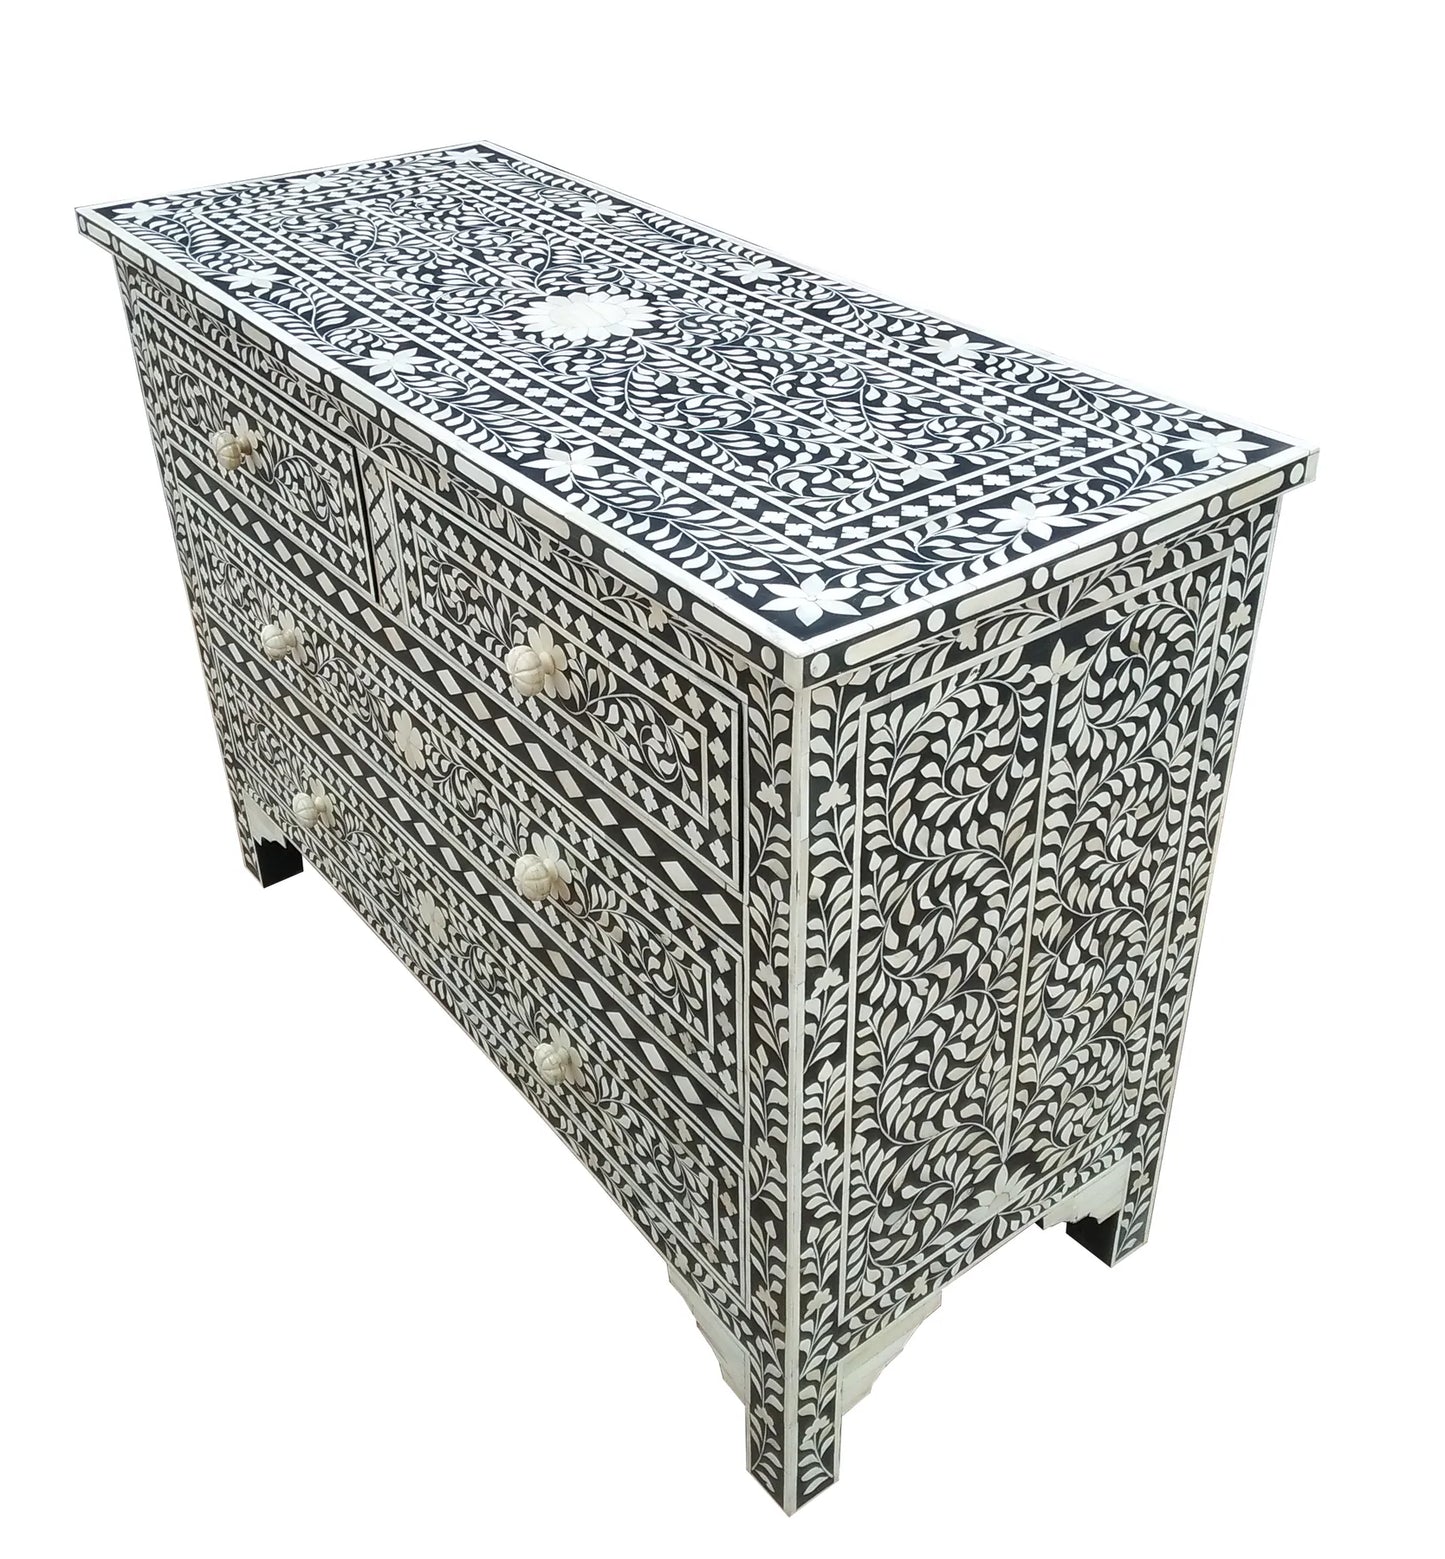 Bone Inlay Chest Of 4 Drawers , Floral Pattern In Black